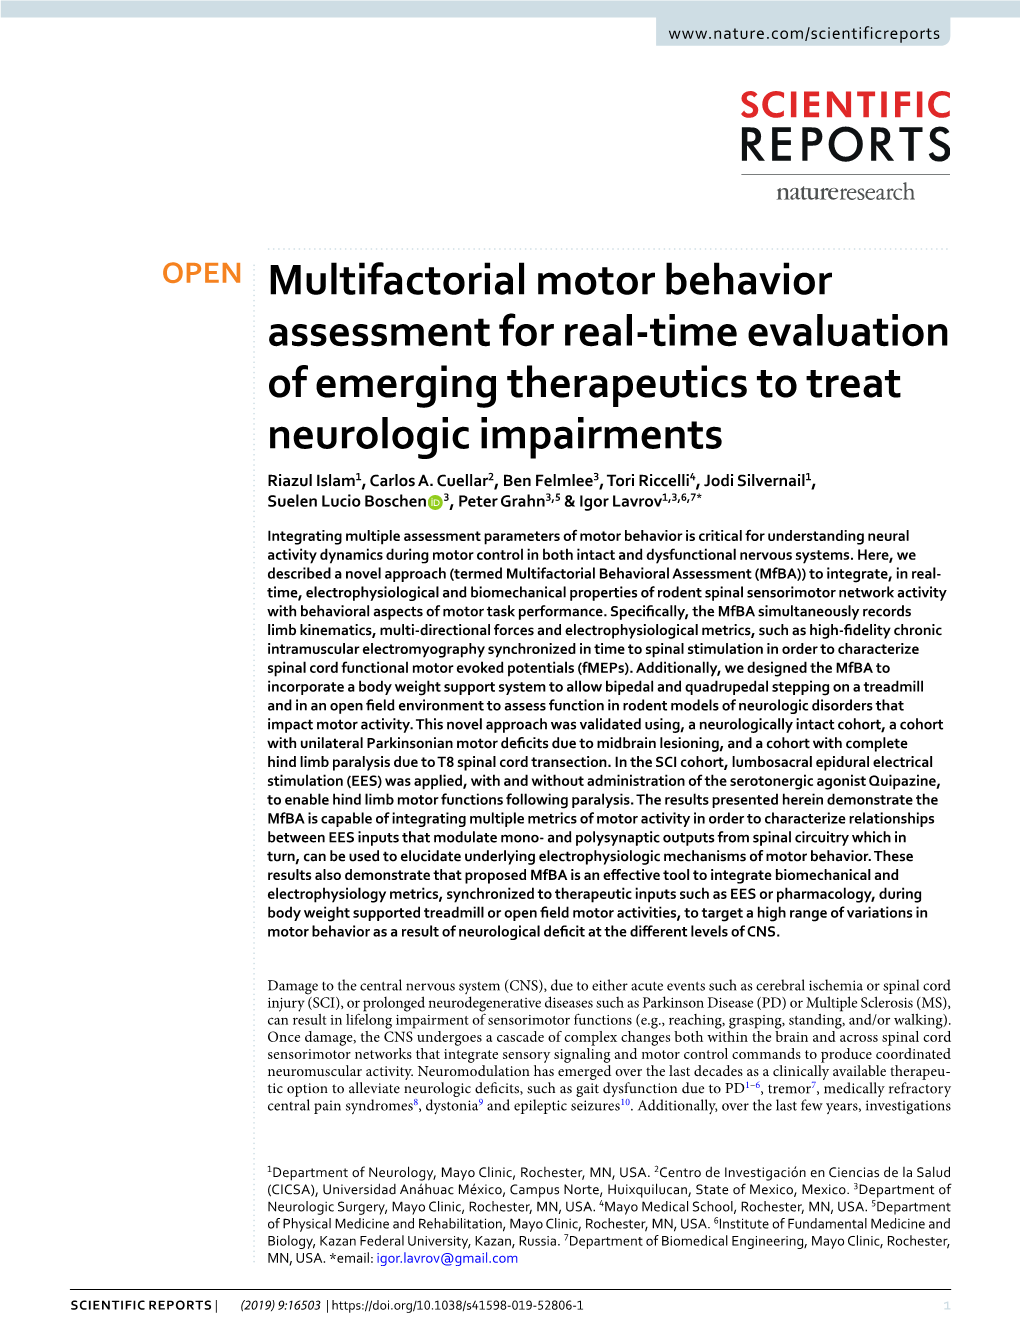 Multifactorial Motor Behavior Assessment for Real-Time Evaluation of Emerging Therapeutics to Treat Neurologic Impairments Riazul Islam1, Carlos A